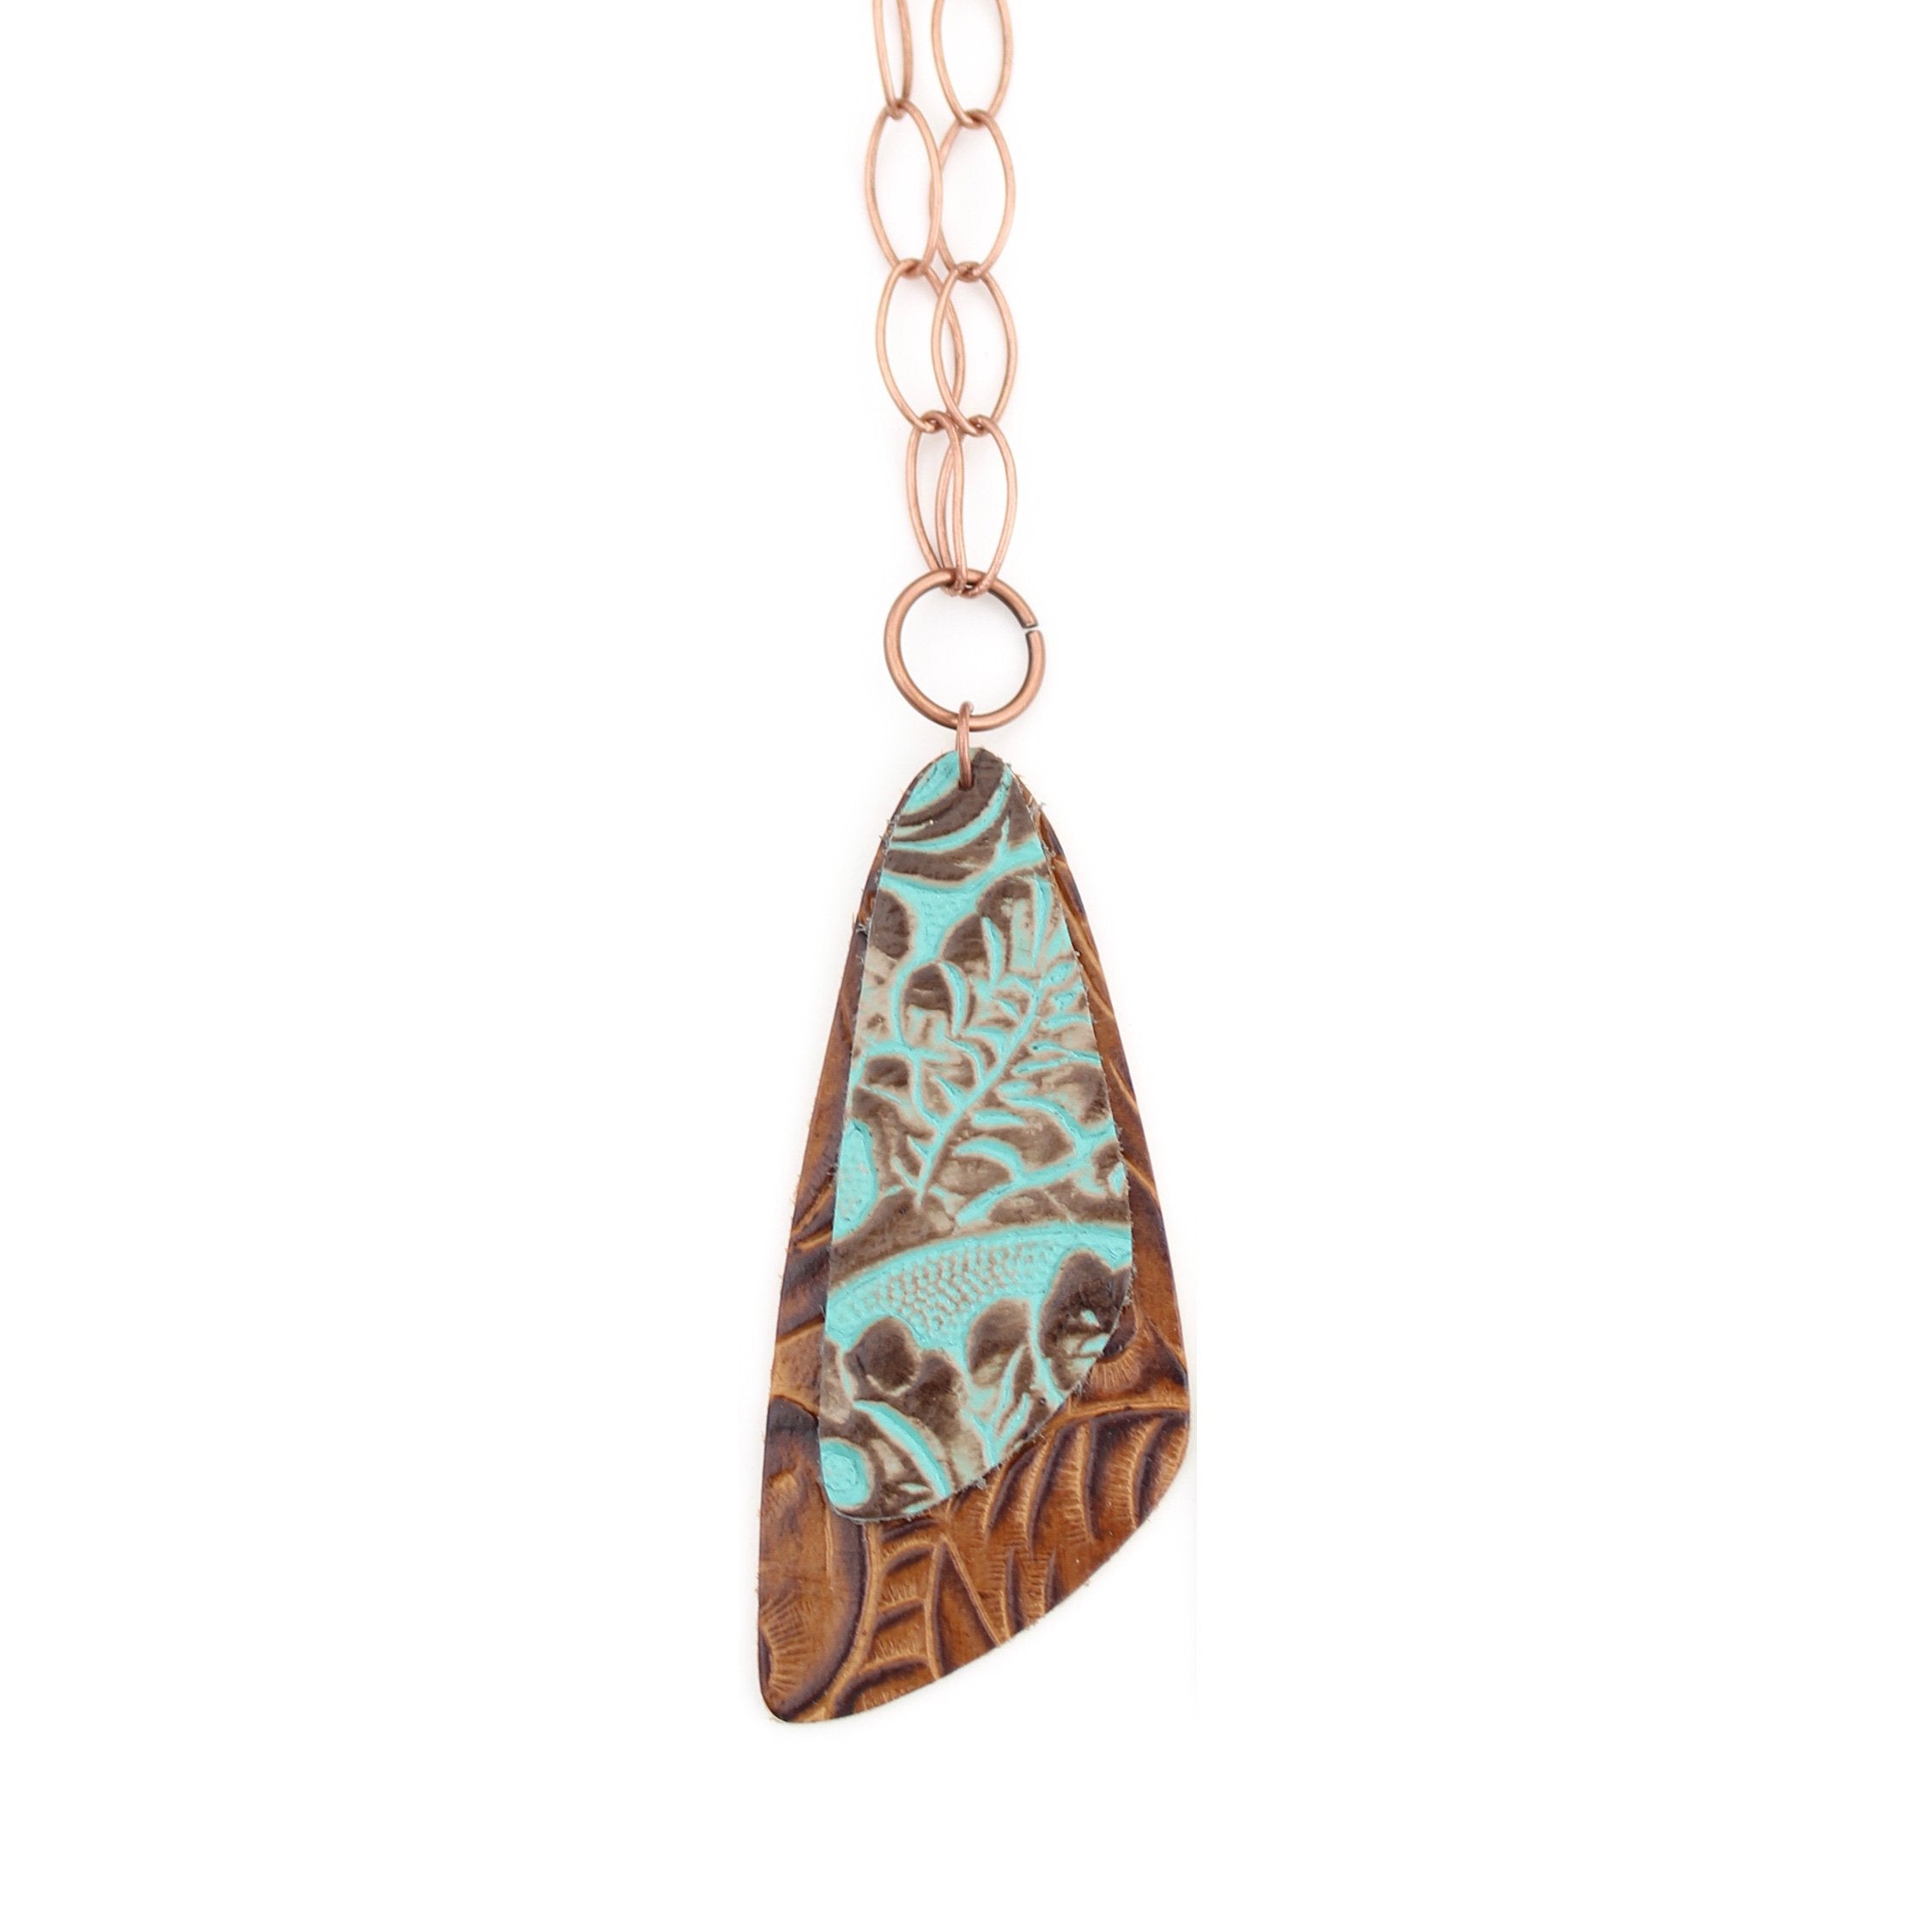 the double descent necklace - tooled turquoise over tooled brown